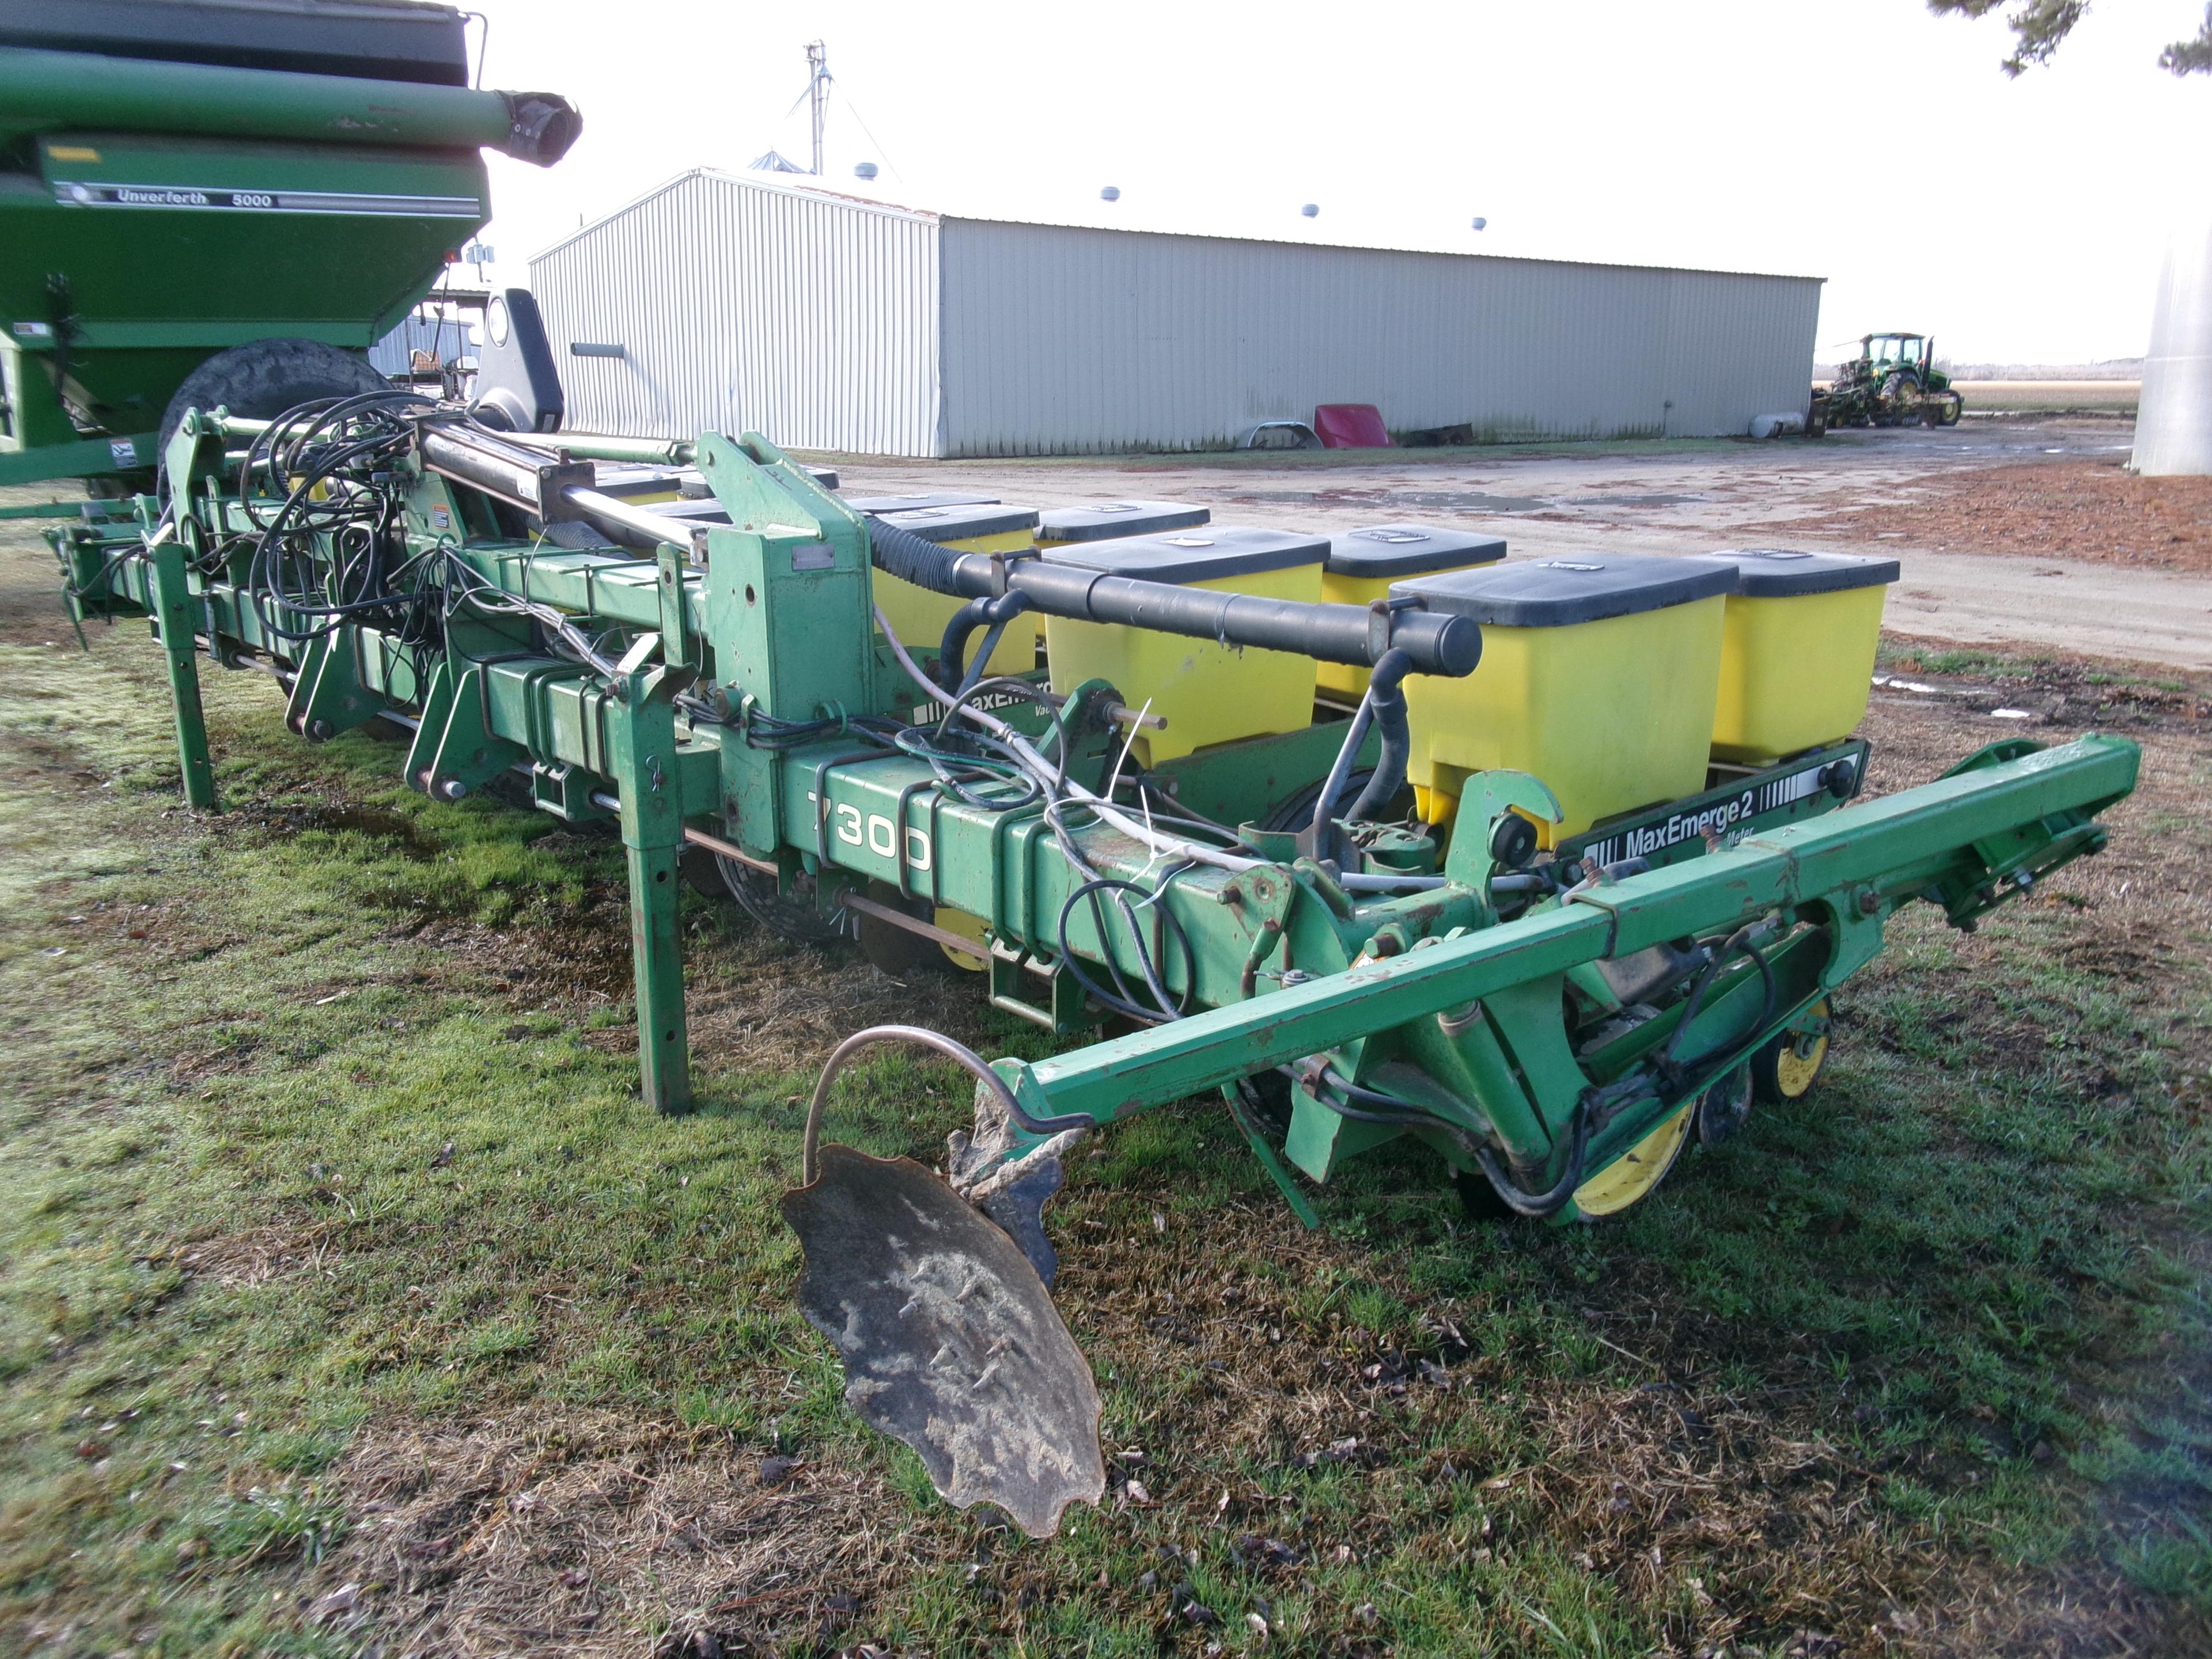 JD 7300 MAXEMERGE 2, 8 ROW VAC PLANTER, STACK FOLD, 36” ROWS, ROW MARKERS